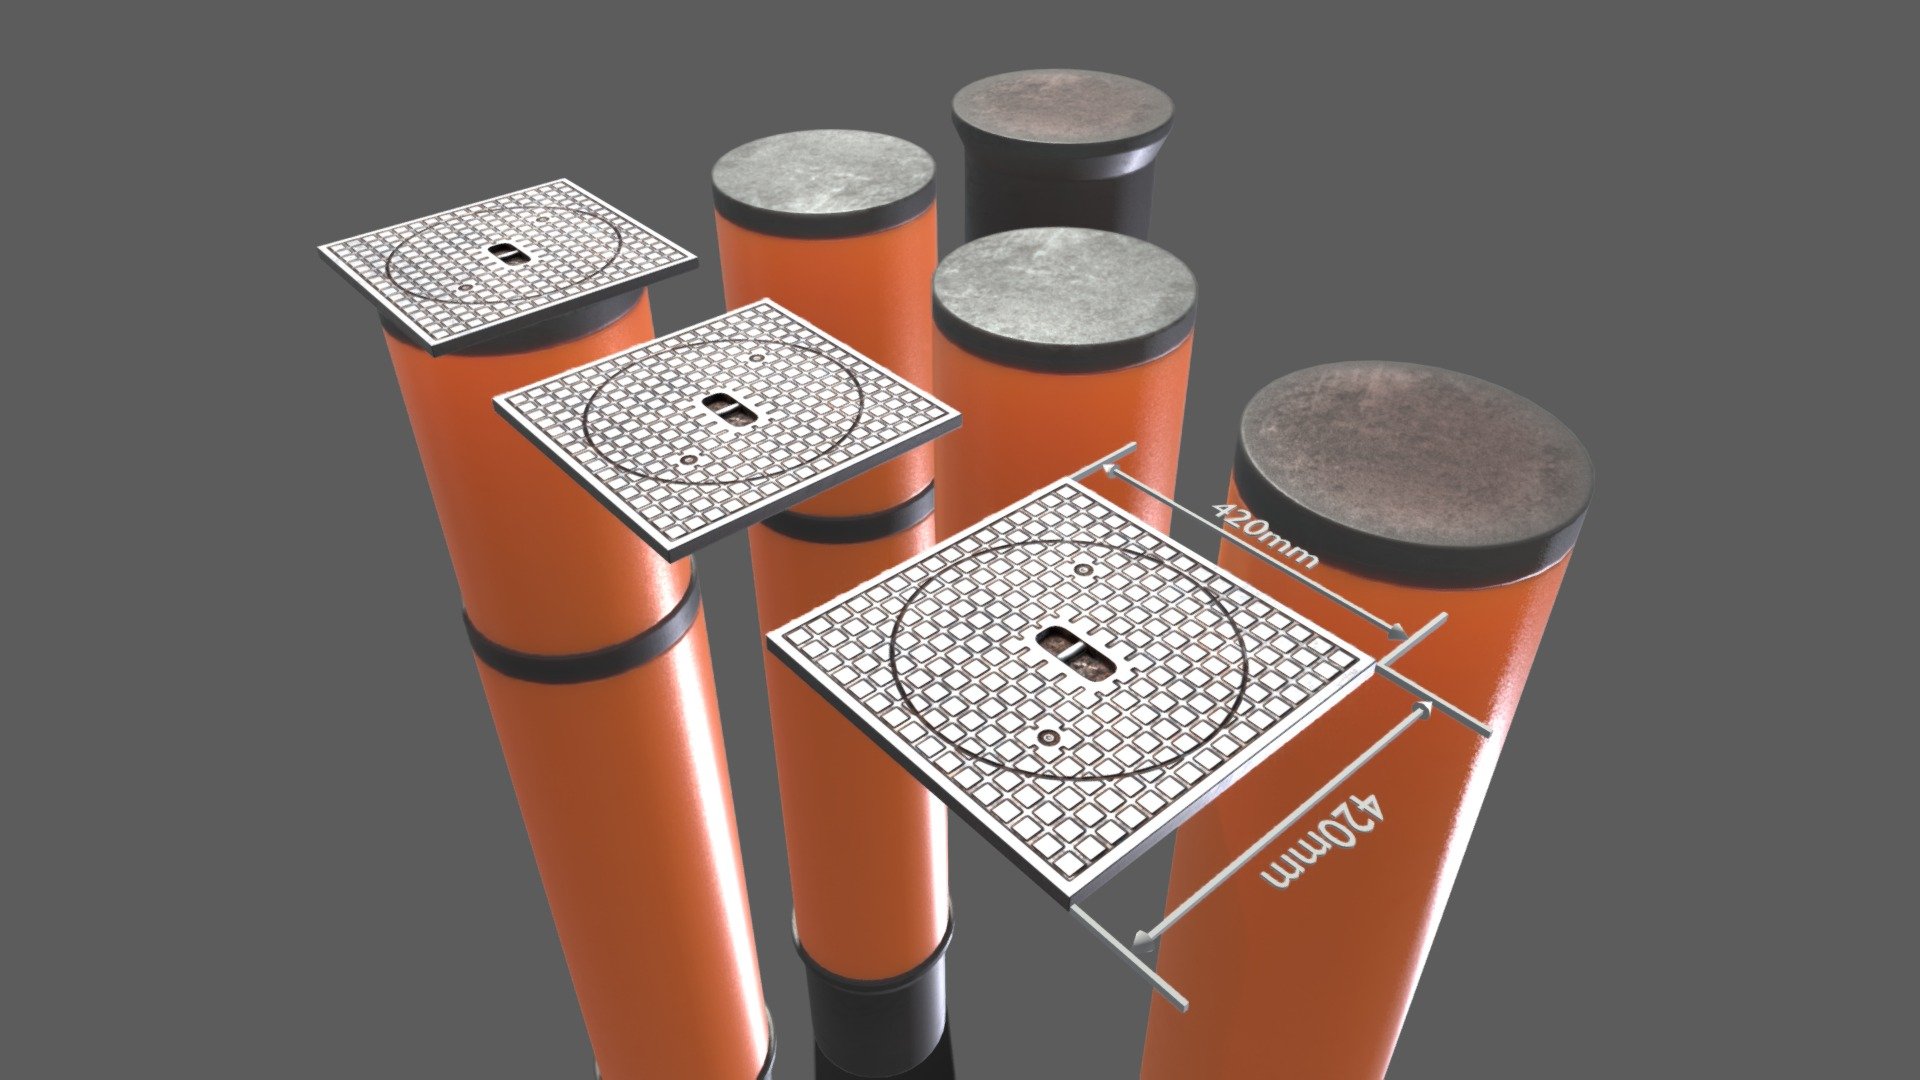 Here is the sewer cover 5 with pipes for an external visualization of a house connection shaft.









PBR-Textures = 4K (PNG)



Parts:




Name - Pipe_1 


Dimensions -  0.400m x 0.400m x 0.620m




Polygons = 218








Name - Pipe_2 


Dimensions -  0.420m x 0.420m x 1.500m




Polygons = 218








Name - Pipe_3 


Dimensions -  0.453m x 0.453m x 0.488m




Polygons = 282








Name - Pipe_4 


Dimensions -  0.420m x 0.420m x 2.607m




Polygons = 718








Name - Sewer Cover 5 Low-Poly 


Dimensions -  0.420m x 0.420m x 0.059m




Polygons = 230








Name - Sewer Cover 5 Low-Poly_Simple 


Dimensions -  0.420m x 0.420m x 0.018m




Polygons = 157








Name - Sewer Cover 5_Pipes 


Dimensions -  0.420m x 0.420m x 2.630m




Polygons = 948




 - Sewer Cover 5 with Pipes (Low-Poly) - Buy Royalty Free 3D model by VIS-All-3D (@VIS-All) 3d model